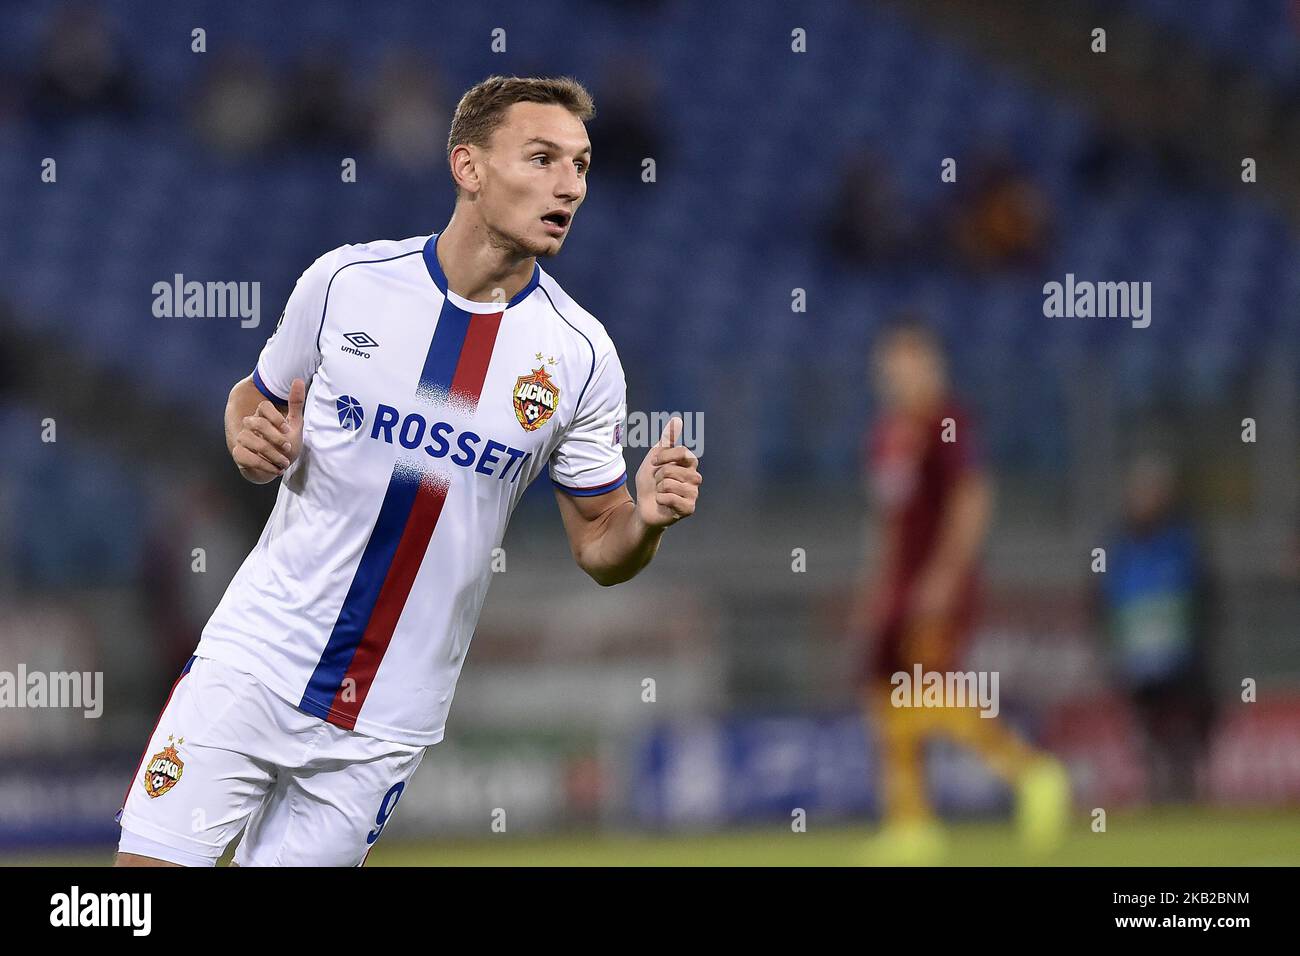 Fyodor Chalov of CSKA Moscow during the UEFA Champions League group stage match between Roma and CSKA Moscow at Stadio Olimpico, Rome, Italy on 23 October 2018. (Photo by Giuseppe Maffia/NurPhoto) Stock Photo